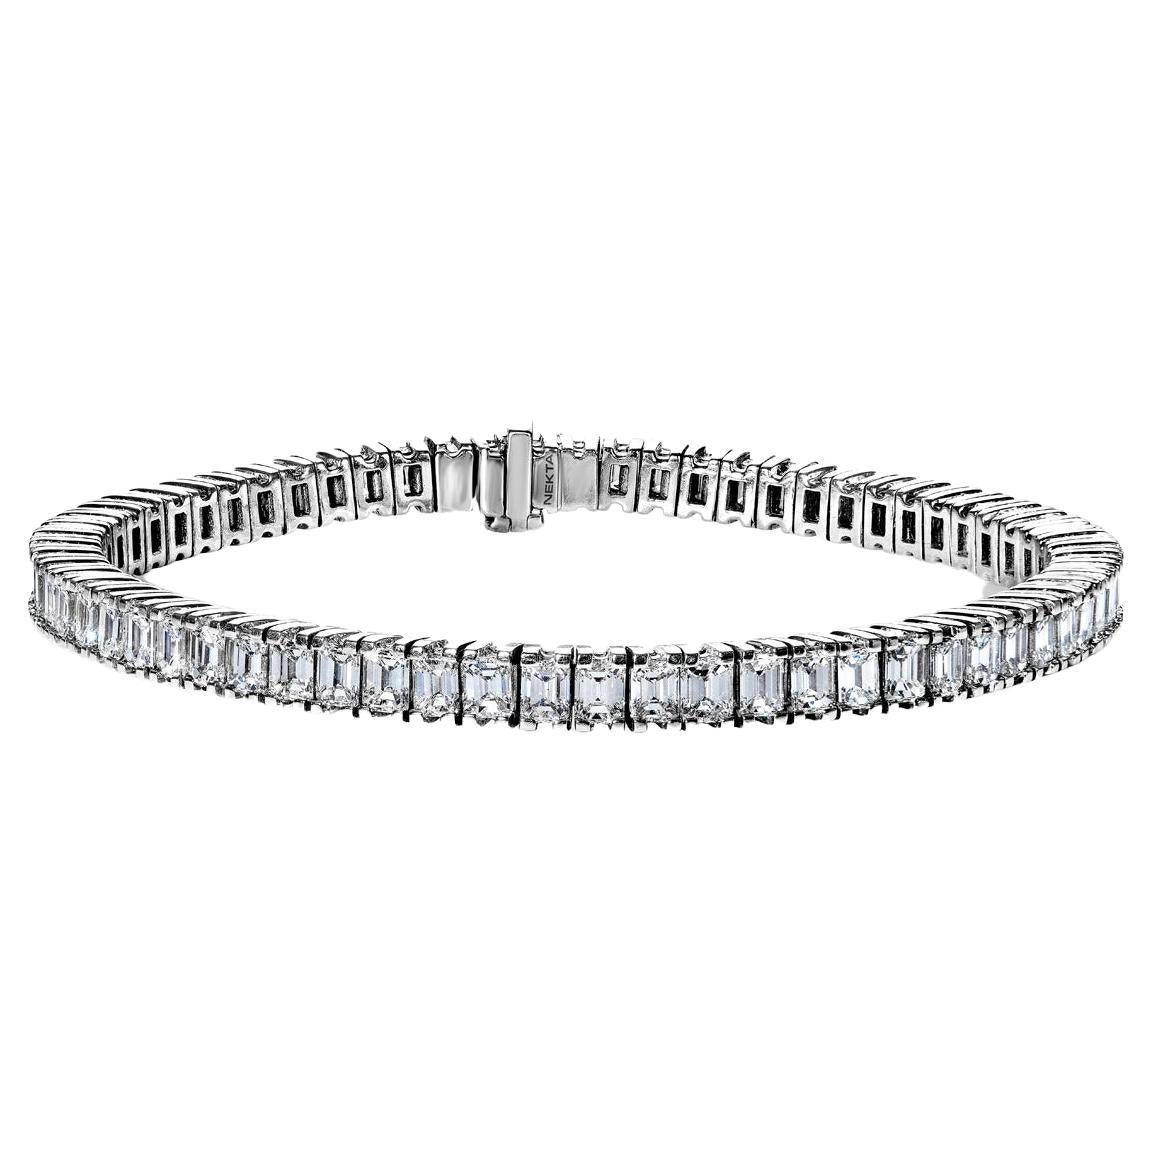 10K Yellow Gold 10 1/3 Cttw Alternating Coco Color and White Diamond 5 Row  Tennis Bracelet (Brown/H-I Color, SI1-SI2 Clarity) - Size 7.25 - Walmart.com